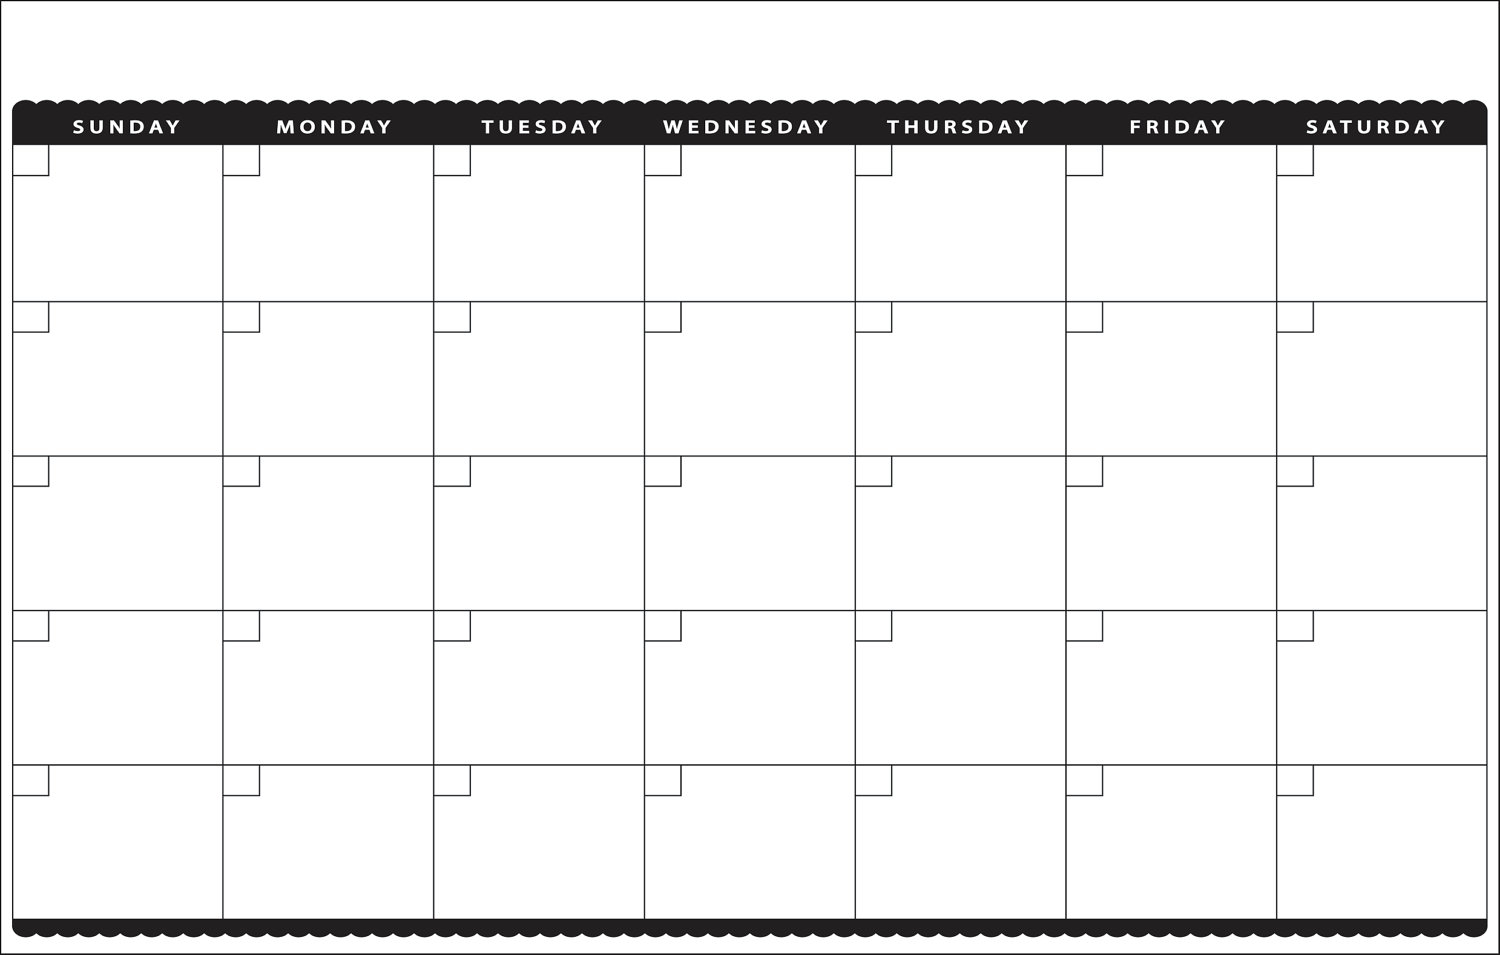 6 Best Images of Month At A Glance Blank Calendar Printable Printable Blank Calendar Template